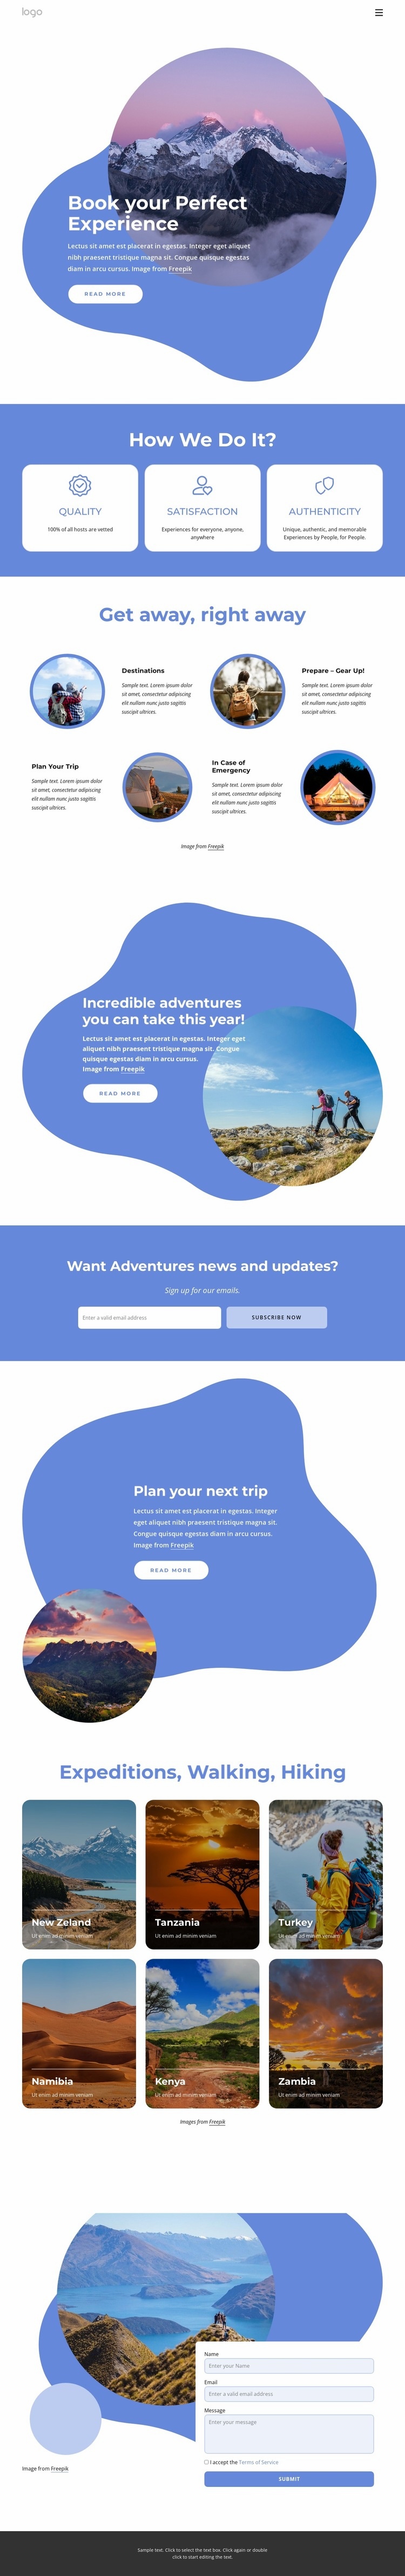 Book your perfect vacations Webflow Template Alternative